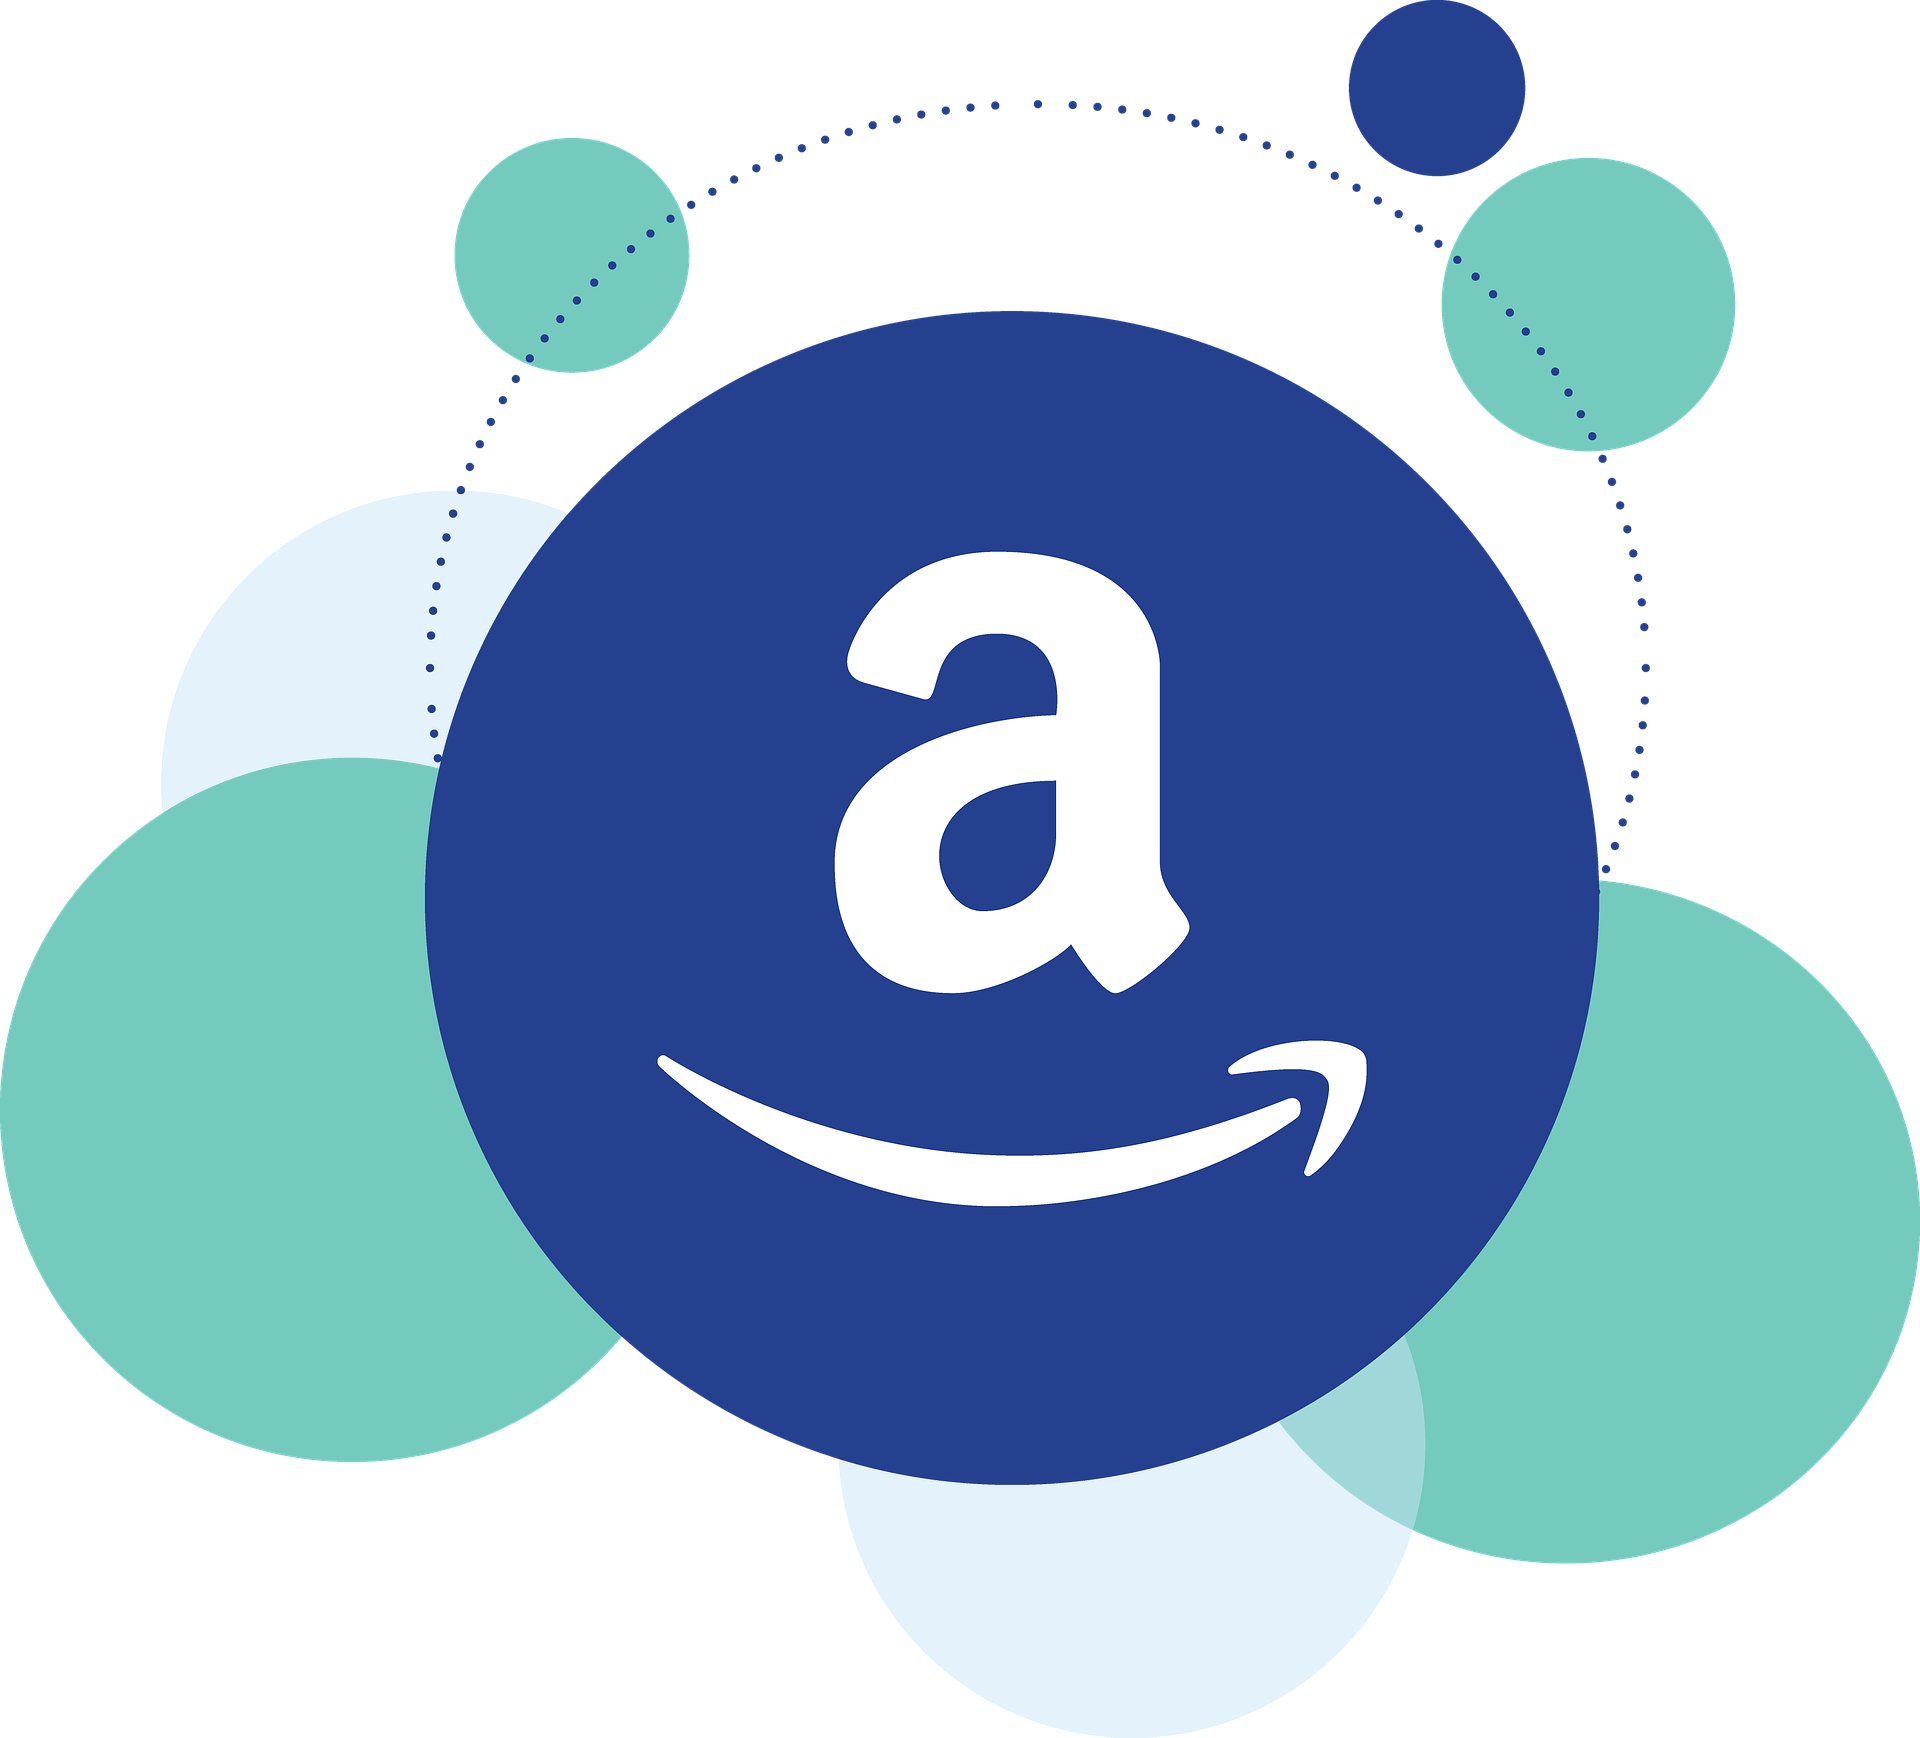 Amazon signs big allies in pledge to be carbon neutral - Tech Xplore